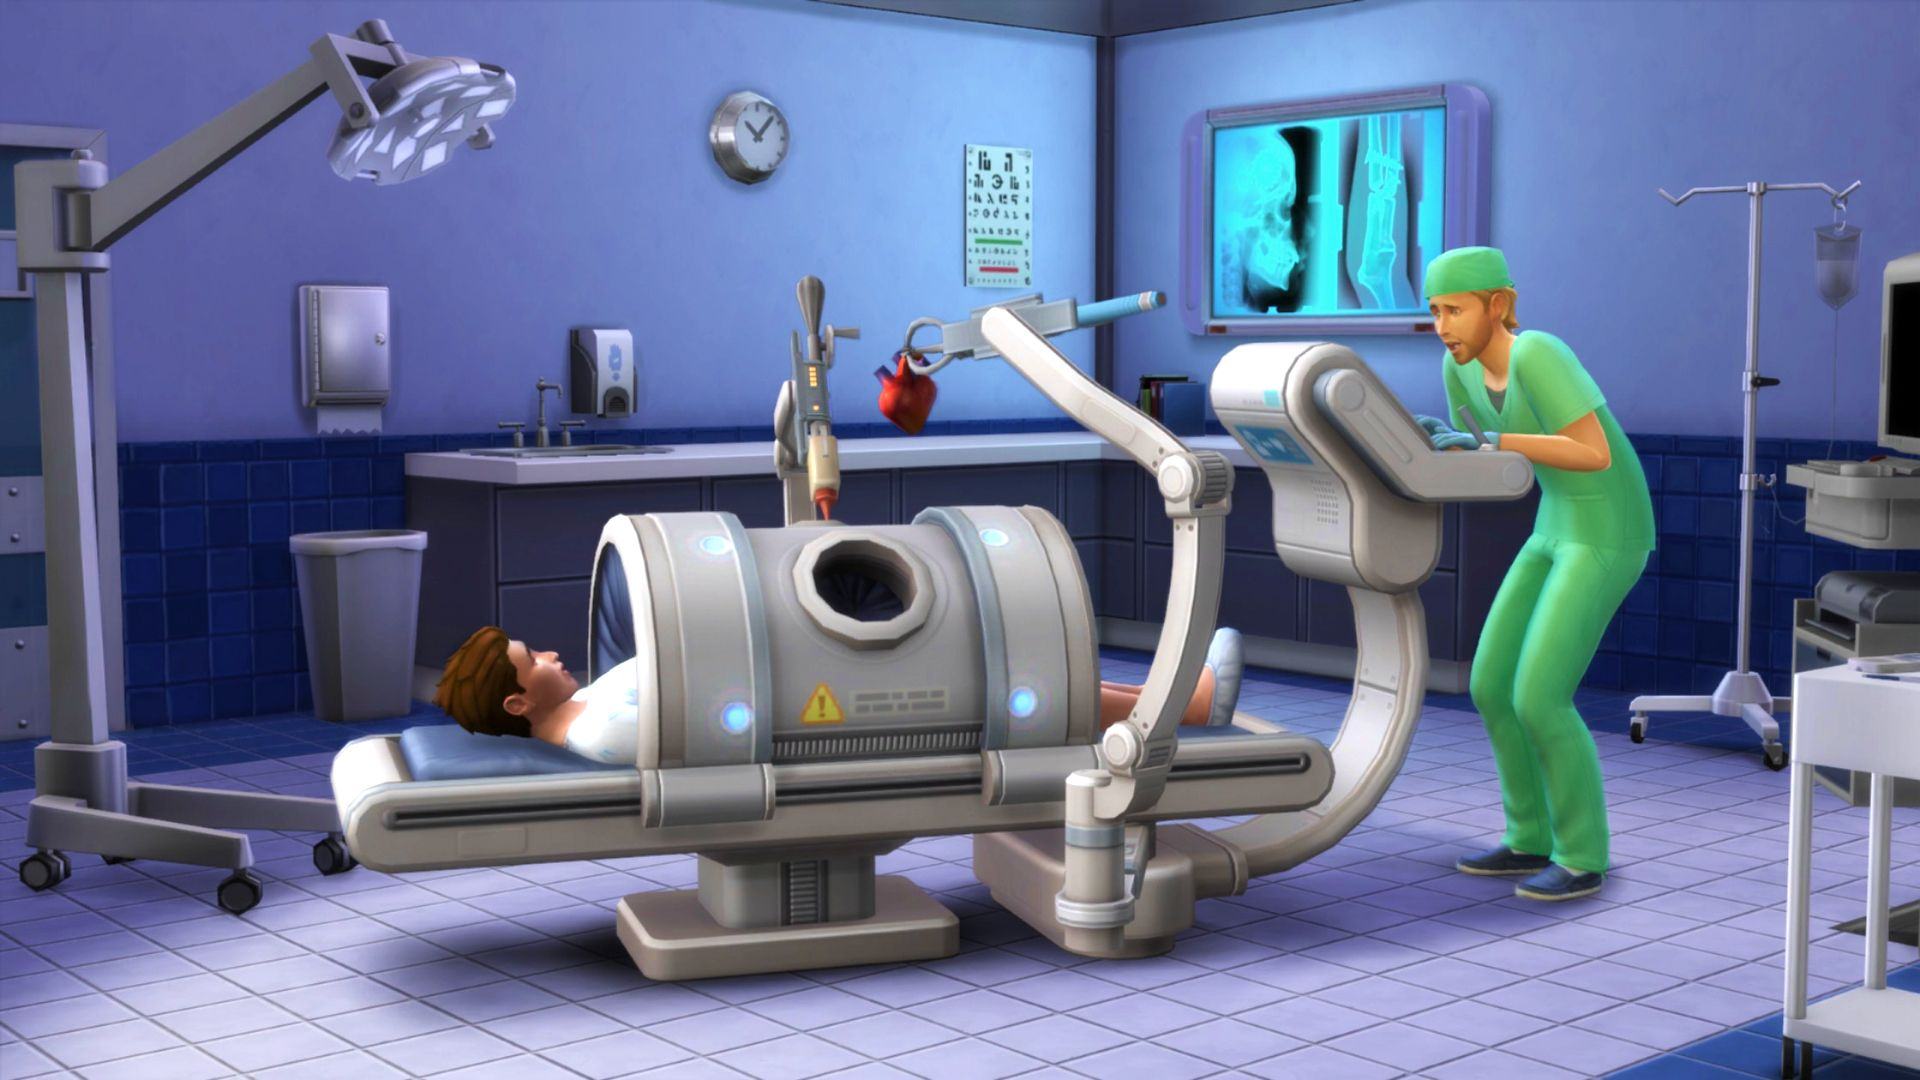 The Sims 4 Doctor Sim Operating On Patient Sim In Hospital